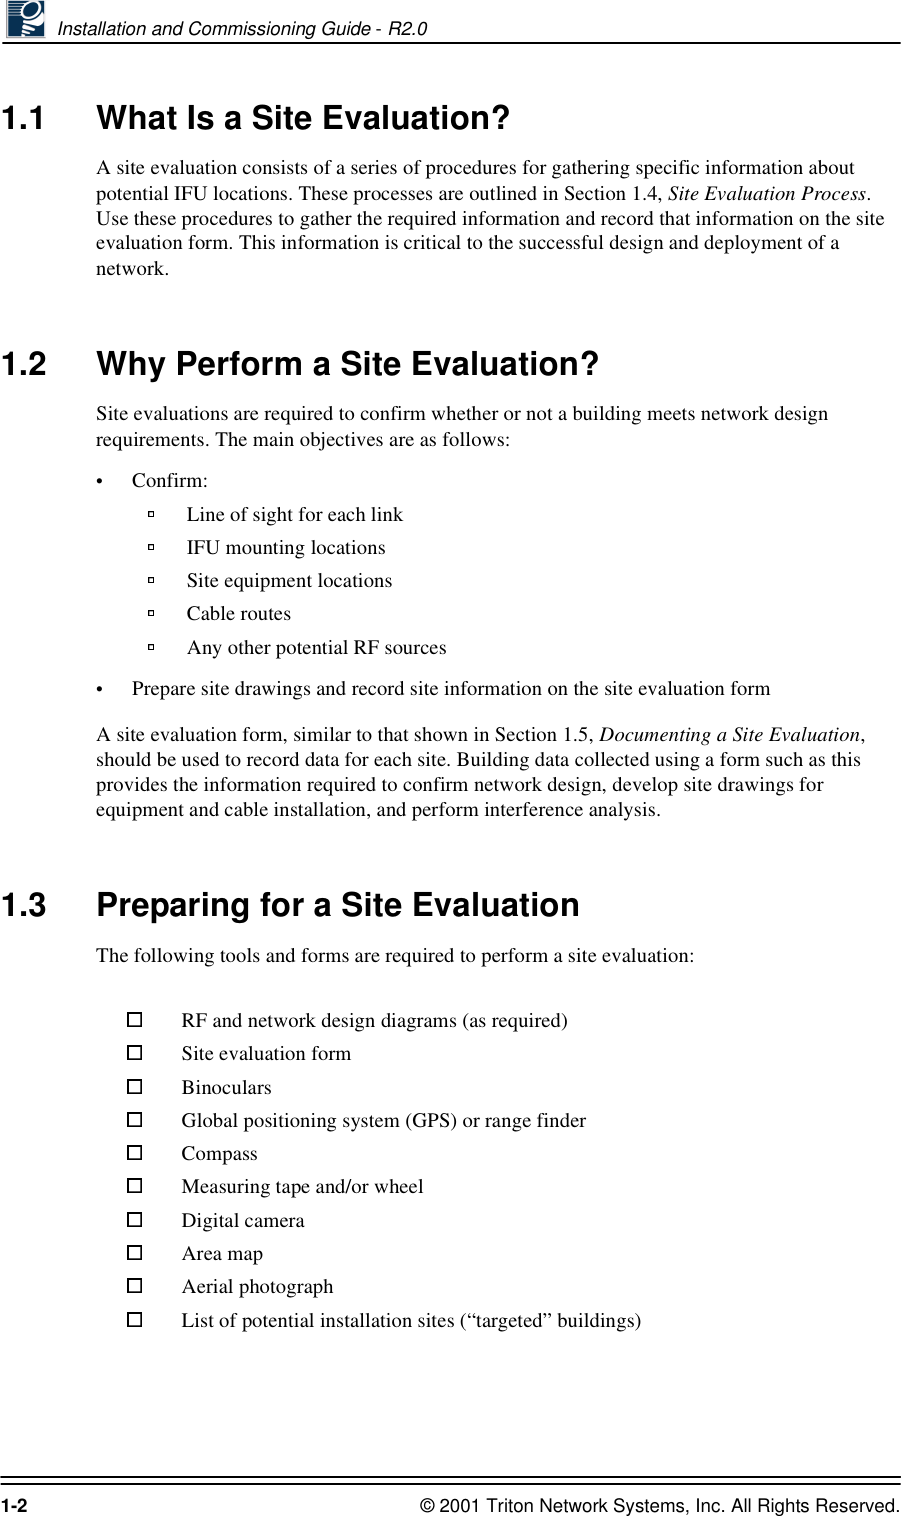  Installation and Commissioning Guide - R2.01-2 © 2001 Triton Network Systems, Inc. All Rights Reserved.1.1 What Is a Site Evaluation?A site evaluation consists of a series of procedures for gathering specific information about potential IFU locations. These processes are outlined in Section 1.4, Site Evaluation Process. Use these procedures to gather the required information and record that information on the site evaluation form. This information is critical to the successful design and deployment of a network.1.2 Why Perform a Site Evaluation?Site evaluations are required to confirm whether or not a building meets network design requirements. The main objectives are as follows:•Confirm:Line of sight for each link IFU mounting locations Site equipment locationsCable routesAny other potential RF sources•Prepare site drawings and record site information on the site evaluation formA site evaluation form, similar to that shown in Section 1.5, Documenting a Site Evaluation, should be used to record data for each site. Building data collected using a form such as this provides the information required to confirm network design, develop site drawings for equipment and cable installation, and perform interference analysis.1.3 Preparing for a Site EvaluationThe following tools and forms are required to perform a site evaluation:RF and network design diagrams (as required)Site evaluation formBinocularsGlobal positioning system (GPS) or range finderCompassMeasuring tape and/or wheelDigital cameraArea mapAerial photographList of potential installation sites (“targeted” buildings)